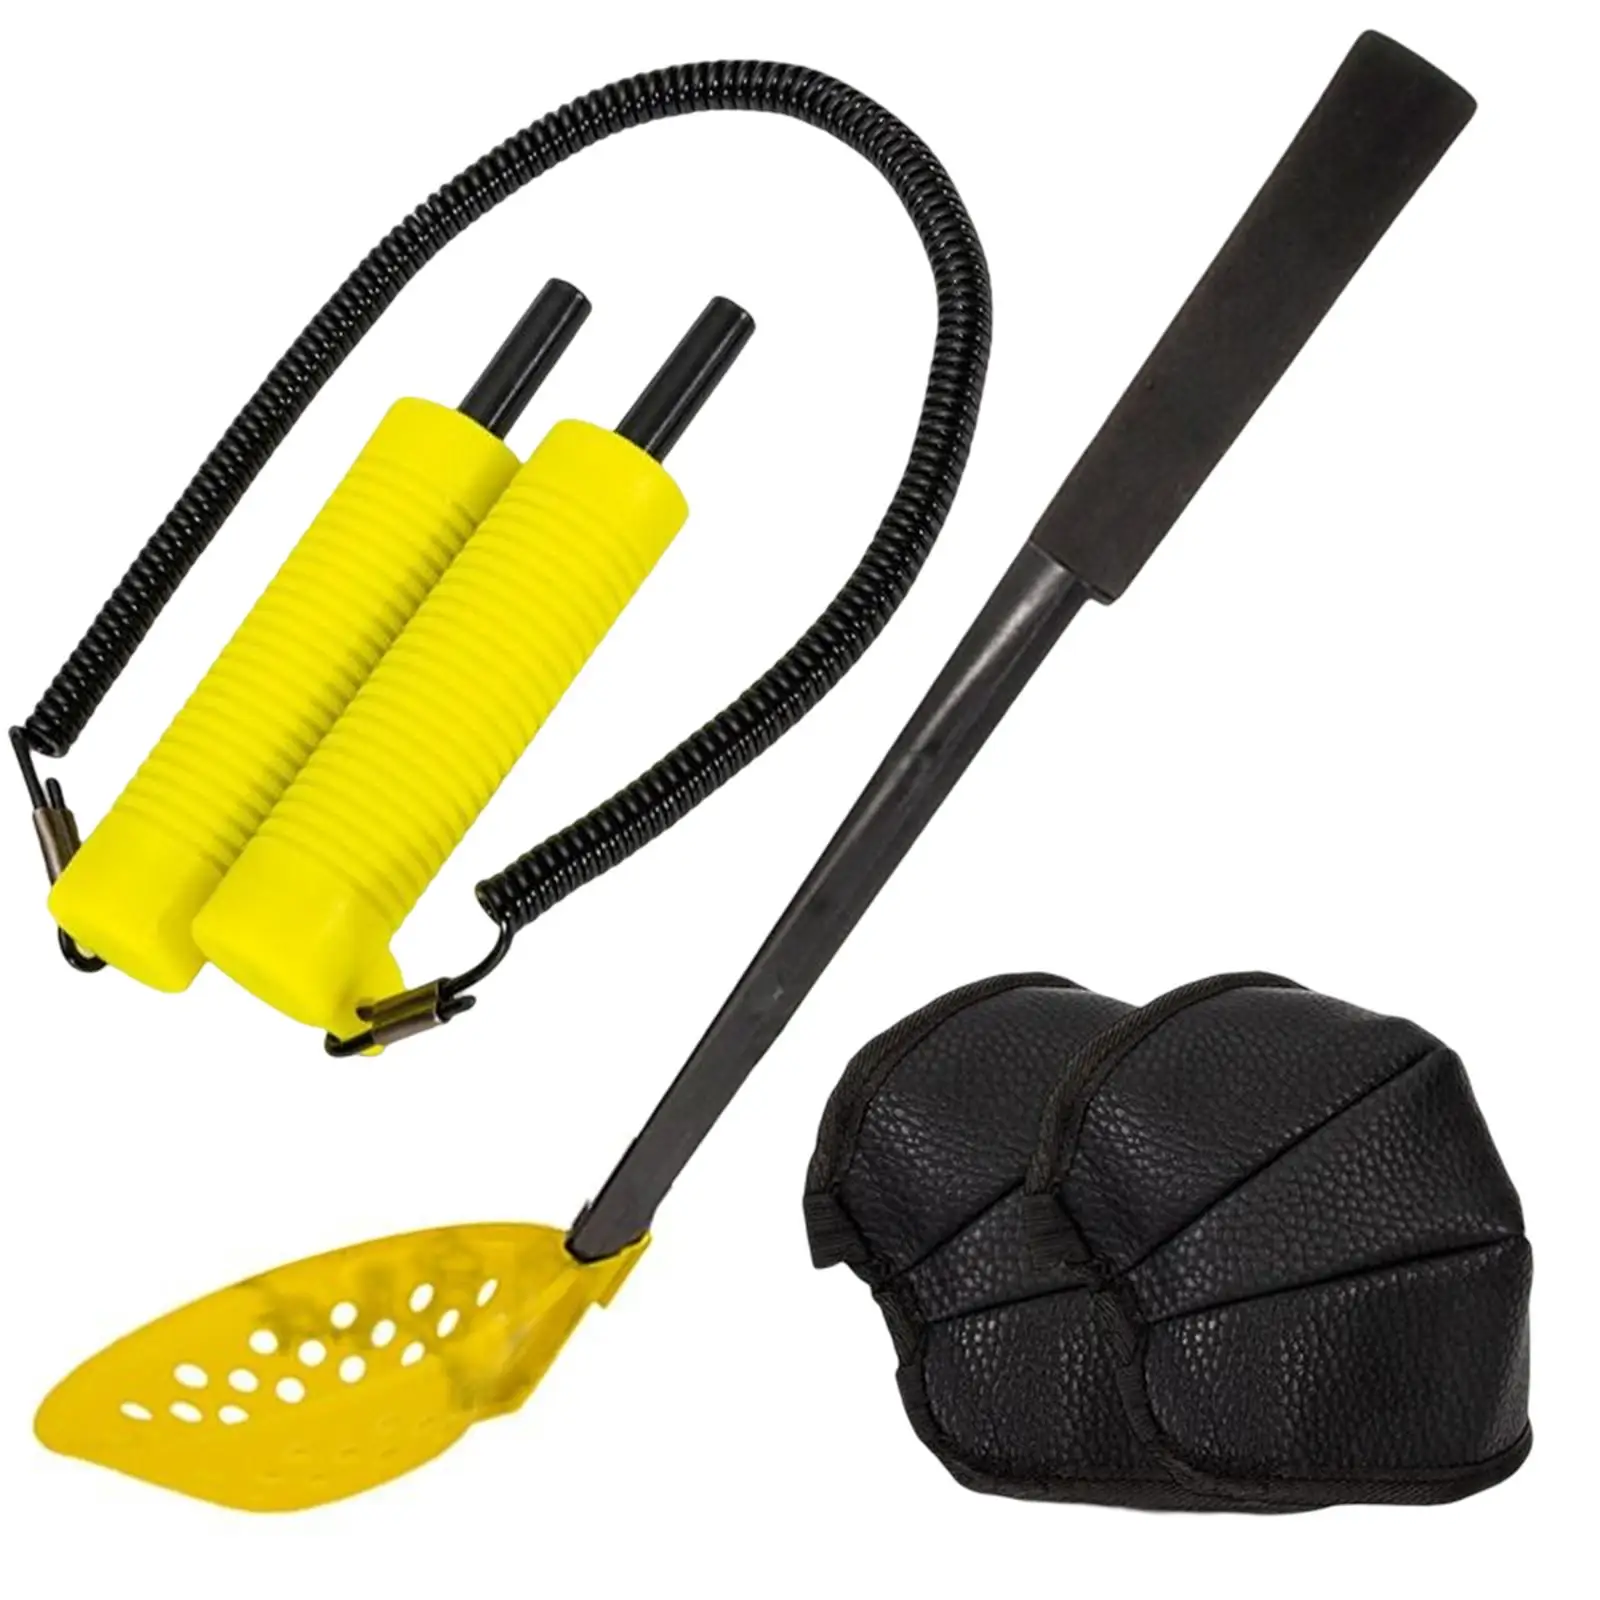 Portable Retractable Ice Pick Threaded Handle for Fishing Emergency